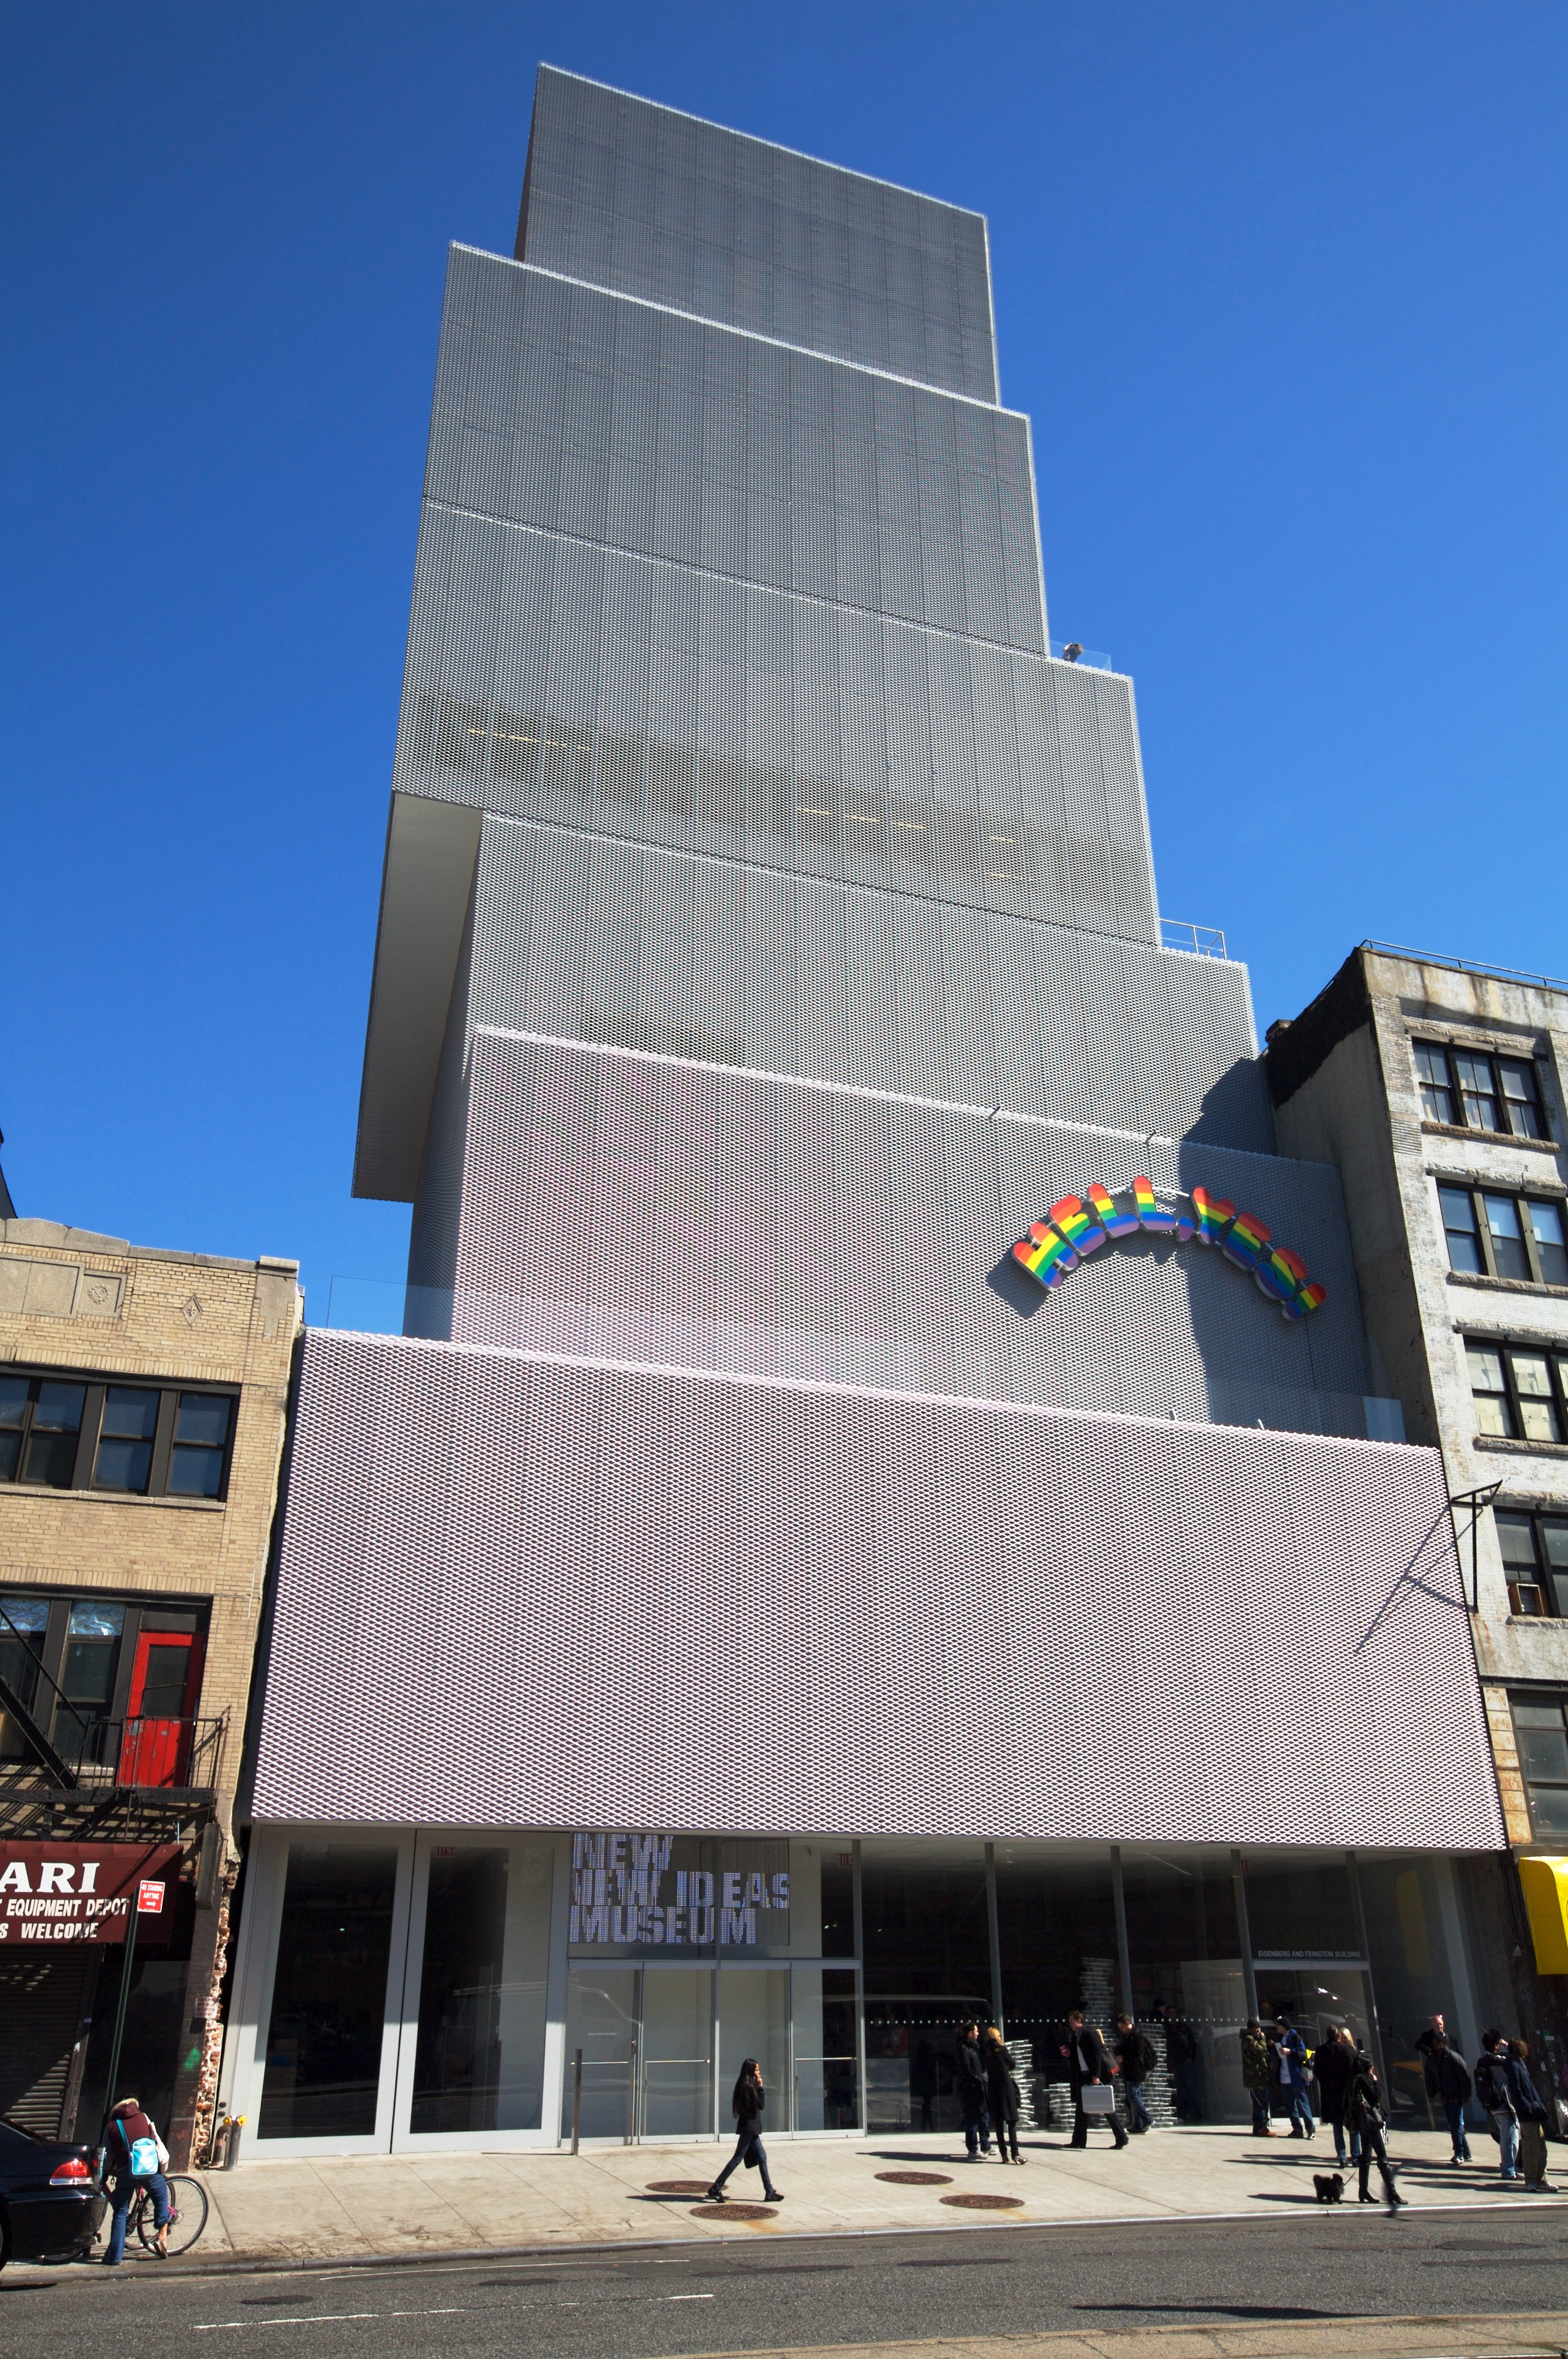 New Museum of Contemporary Art | New York City, USA Attractions